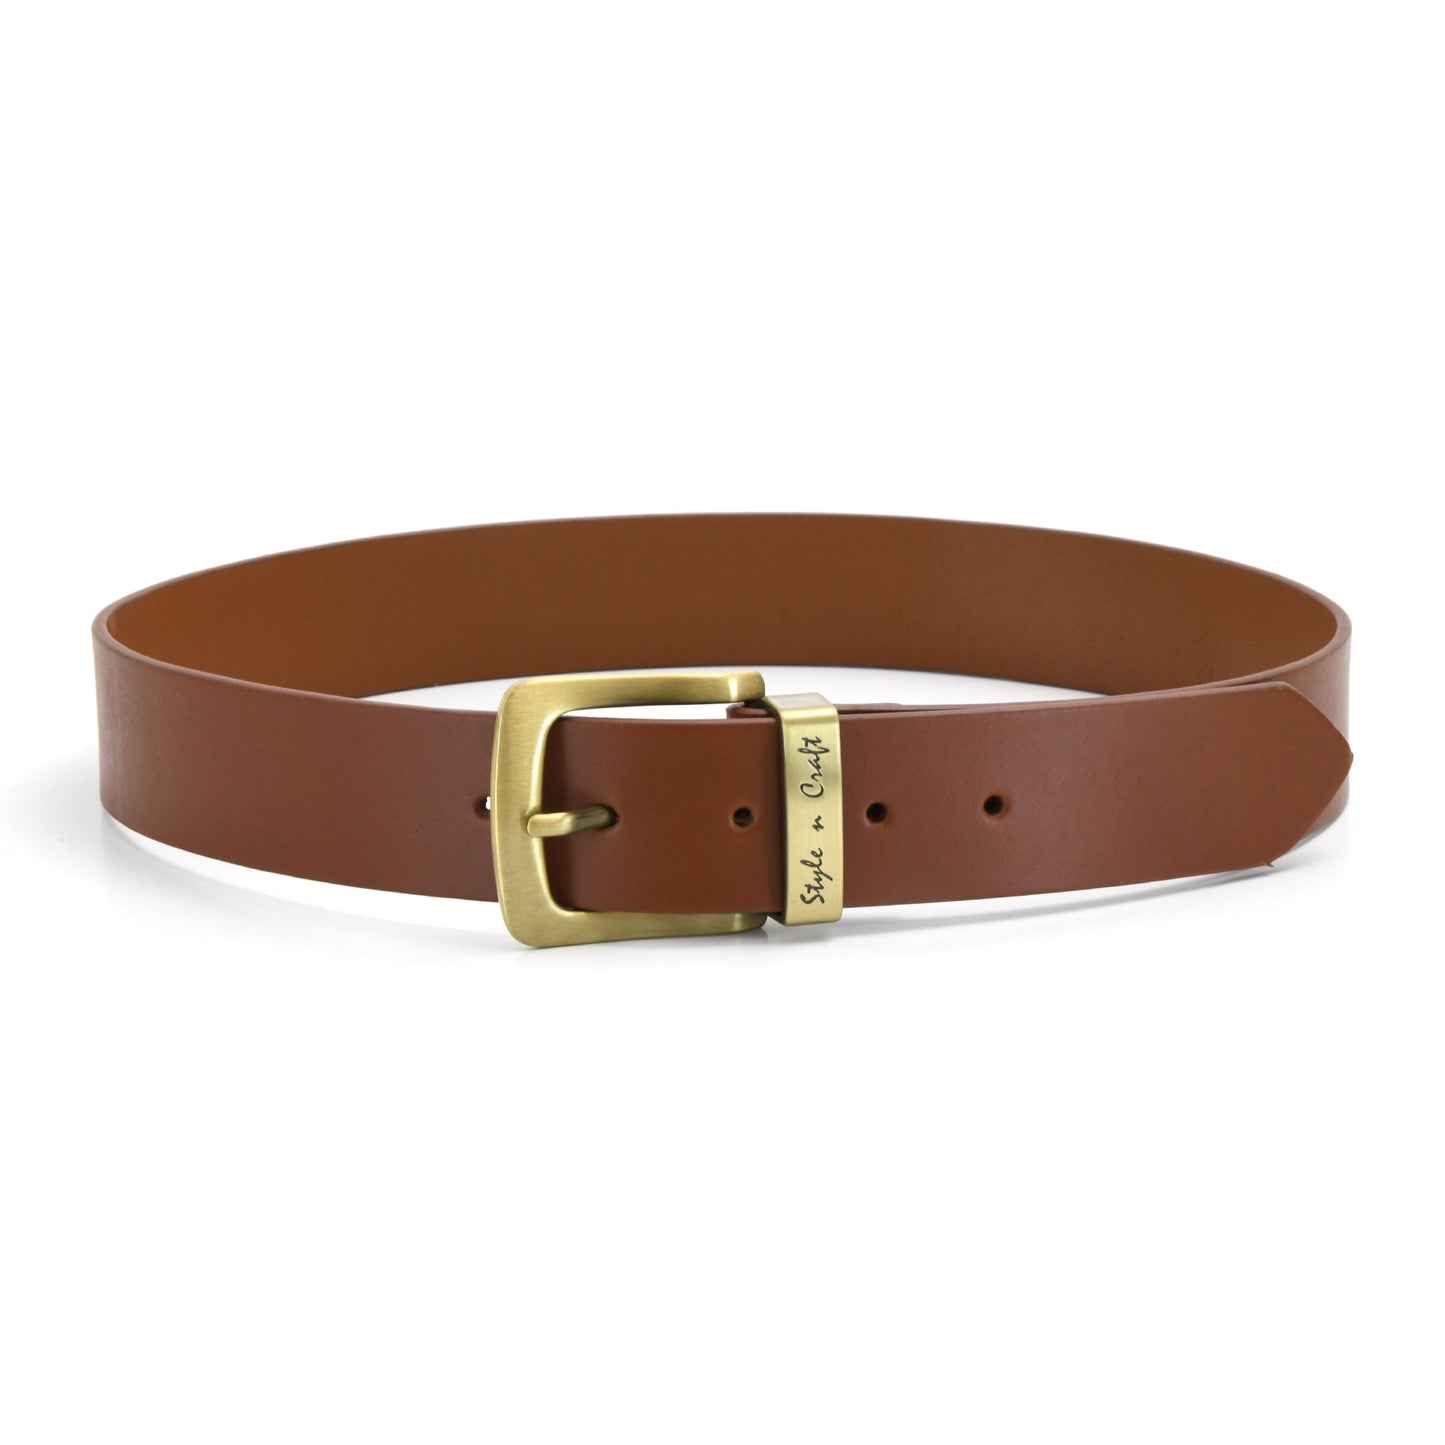 392714 - one and a half inch wide leather belt in tan color full grain leather with matte gold finish metal buckle & loop - front view 2